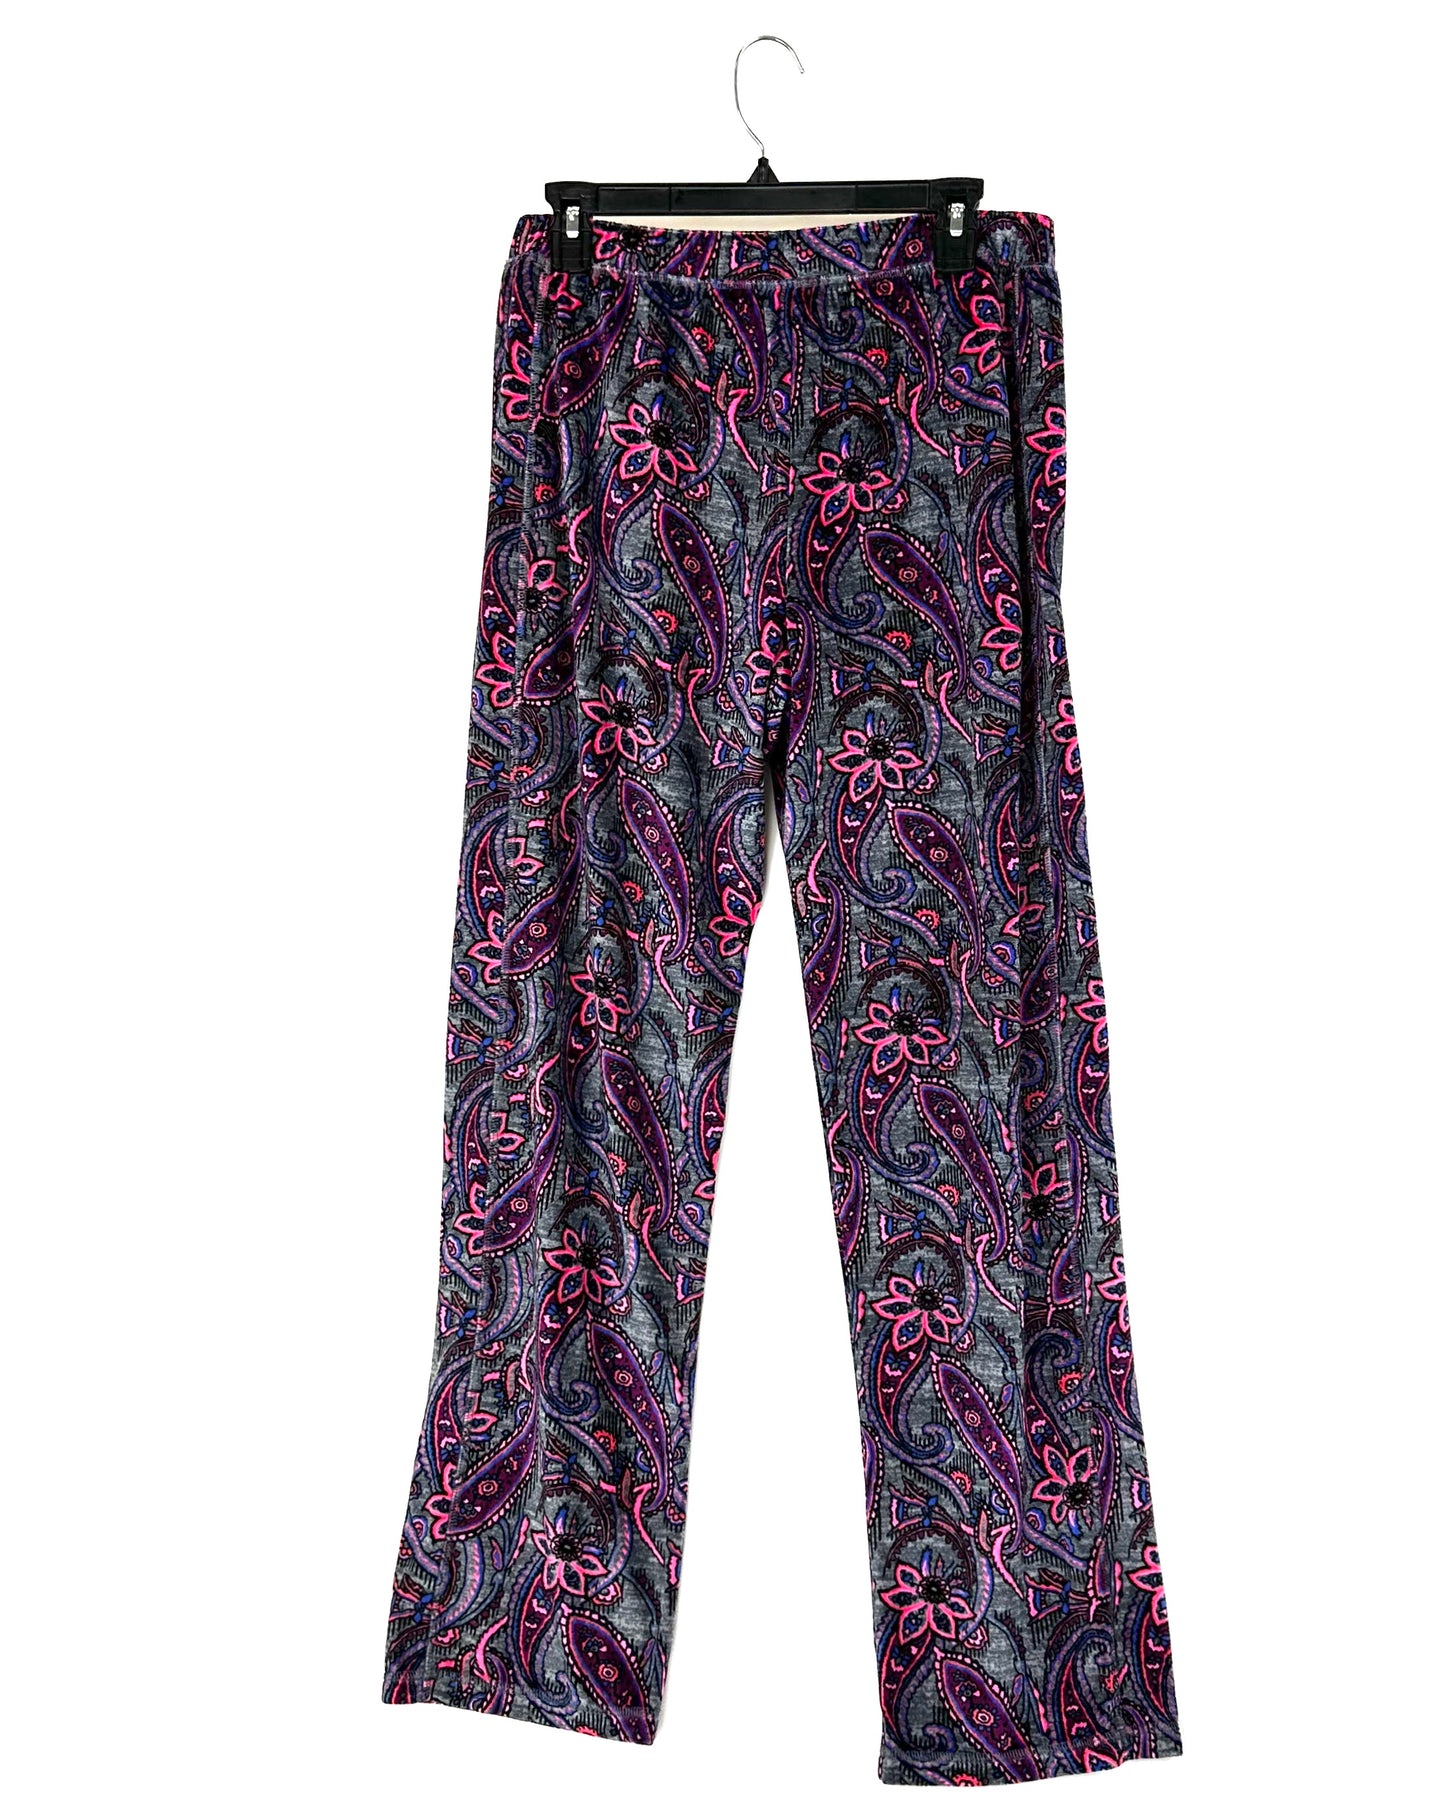 Climate Right By Cuddl Duds Multicolor Pajama Pants - Size 10/12